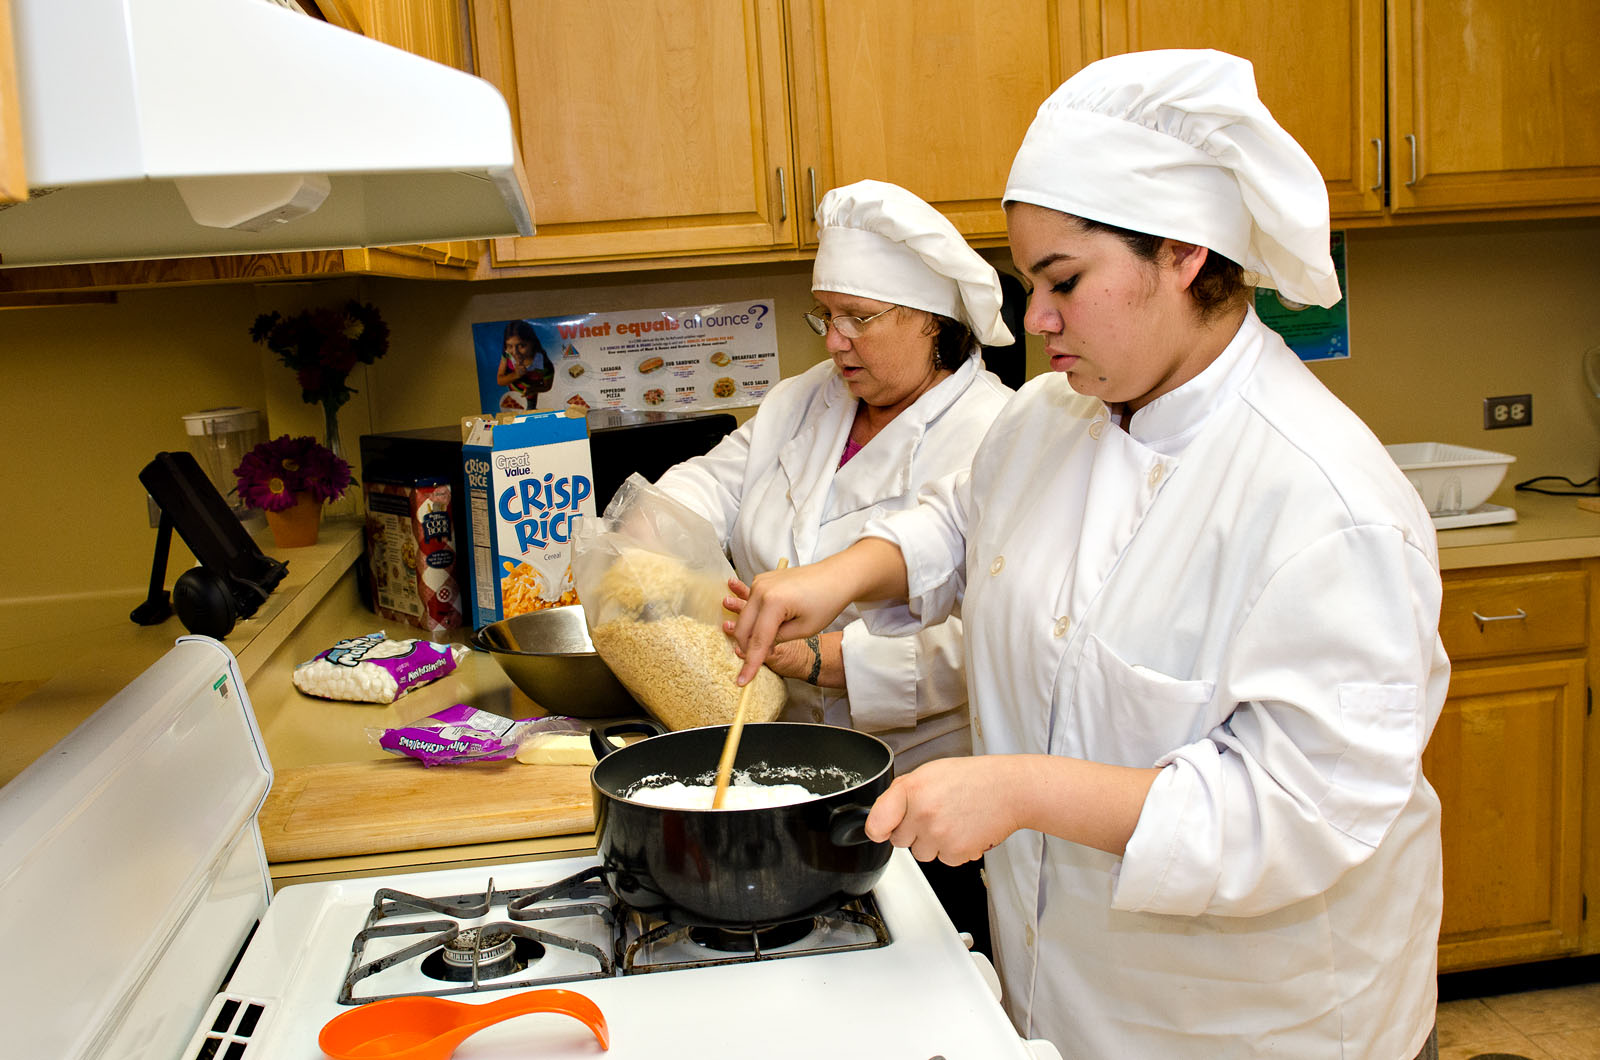 HHSS Catering Club turns passion into campus business